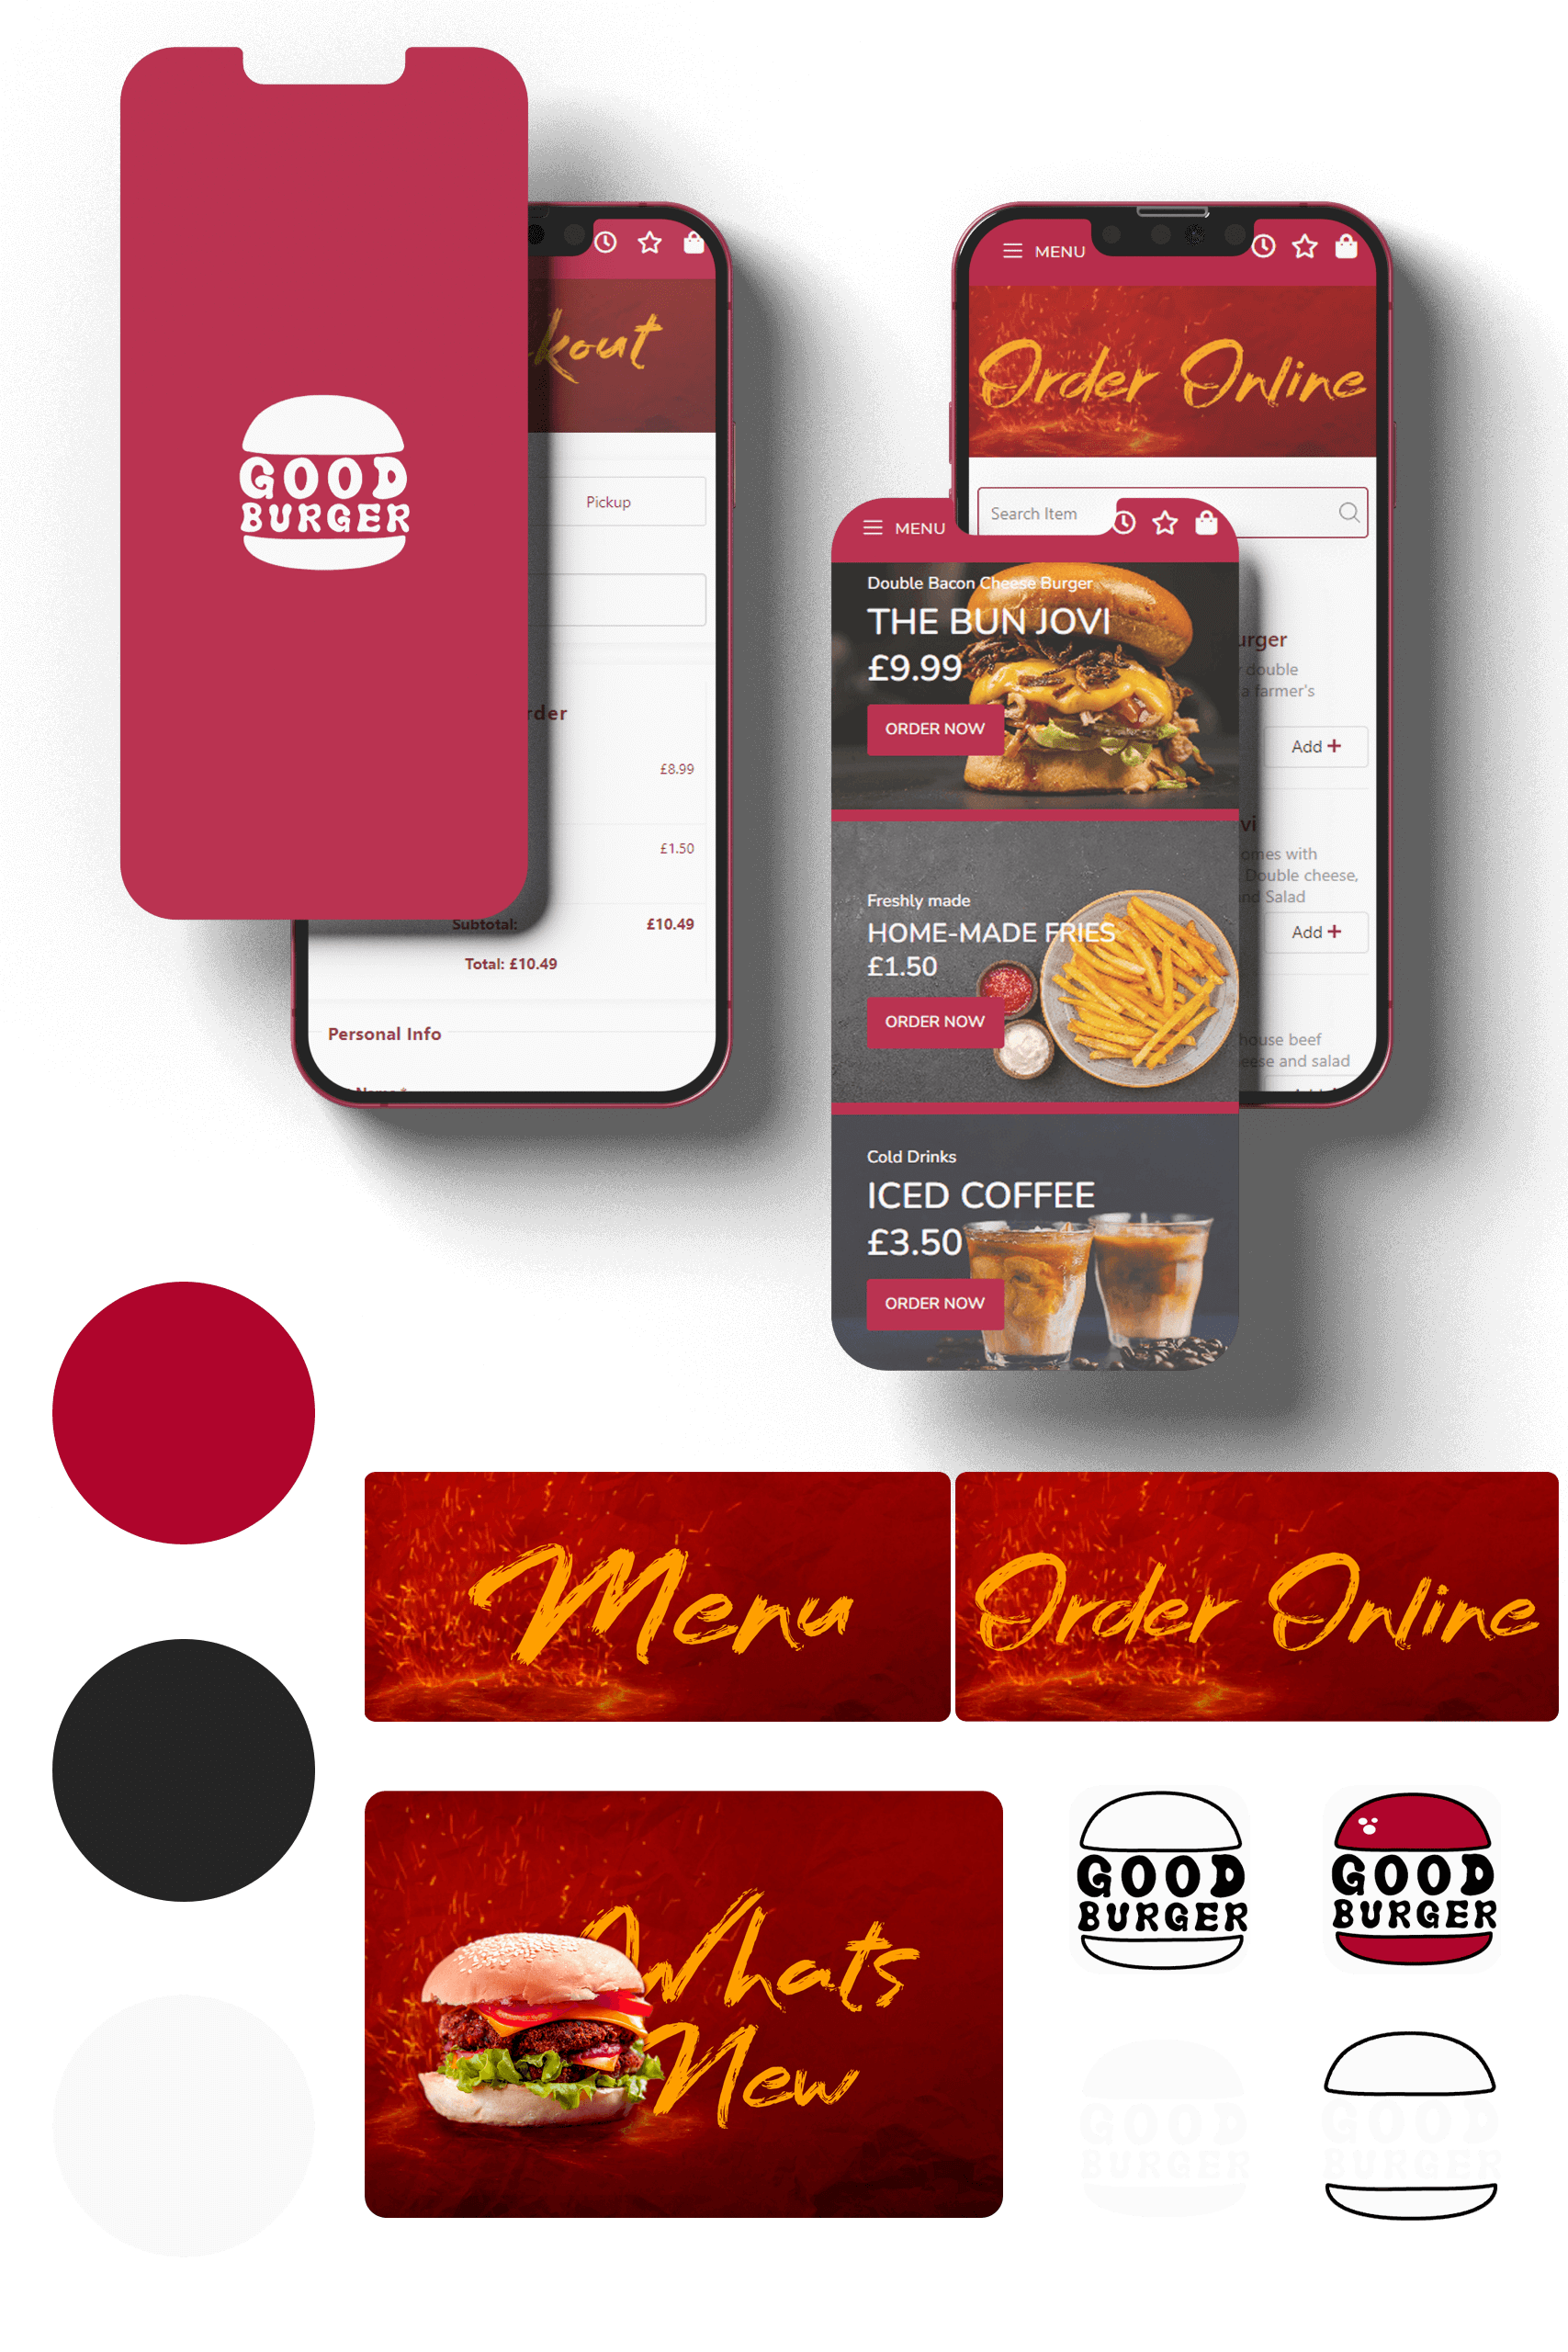 Good Burger- Main Project Image to showcase the app